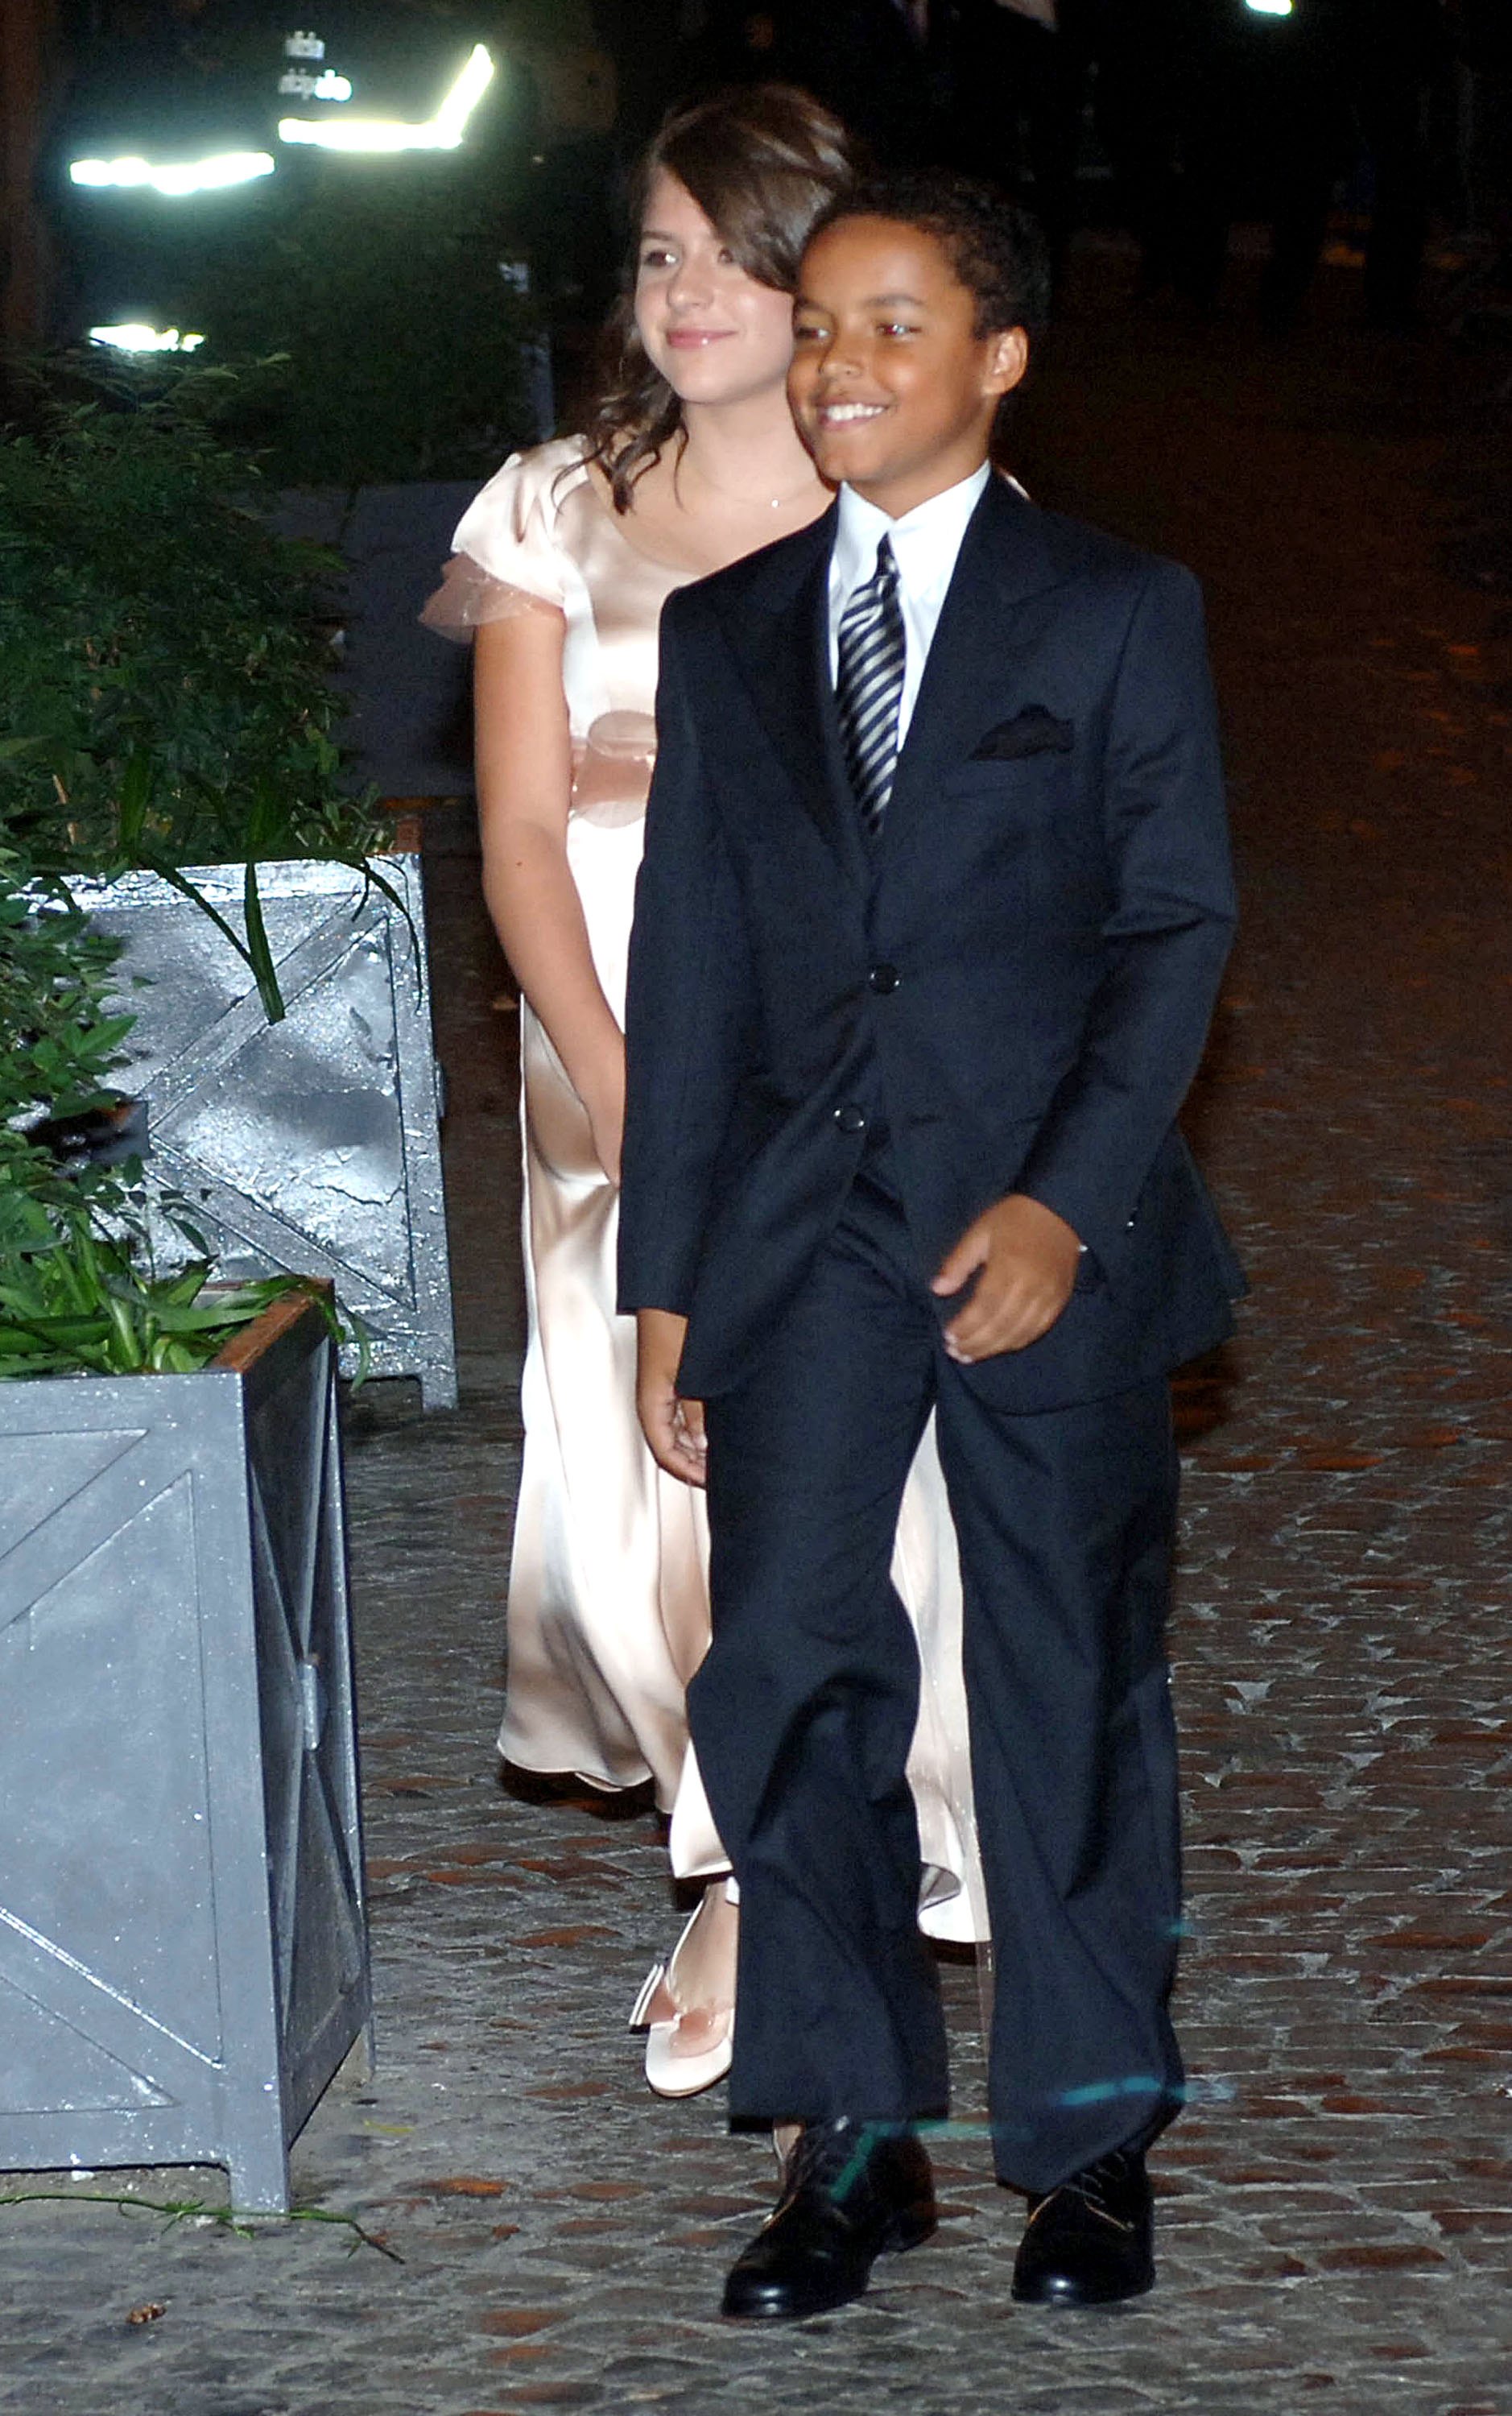 Isabella and Connor Cruise in central Rome prior to a dinner with Katie Holmes and Tom Cruise on November 16, 2006 in Rome, Italy | Source: Getty Images